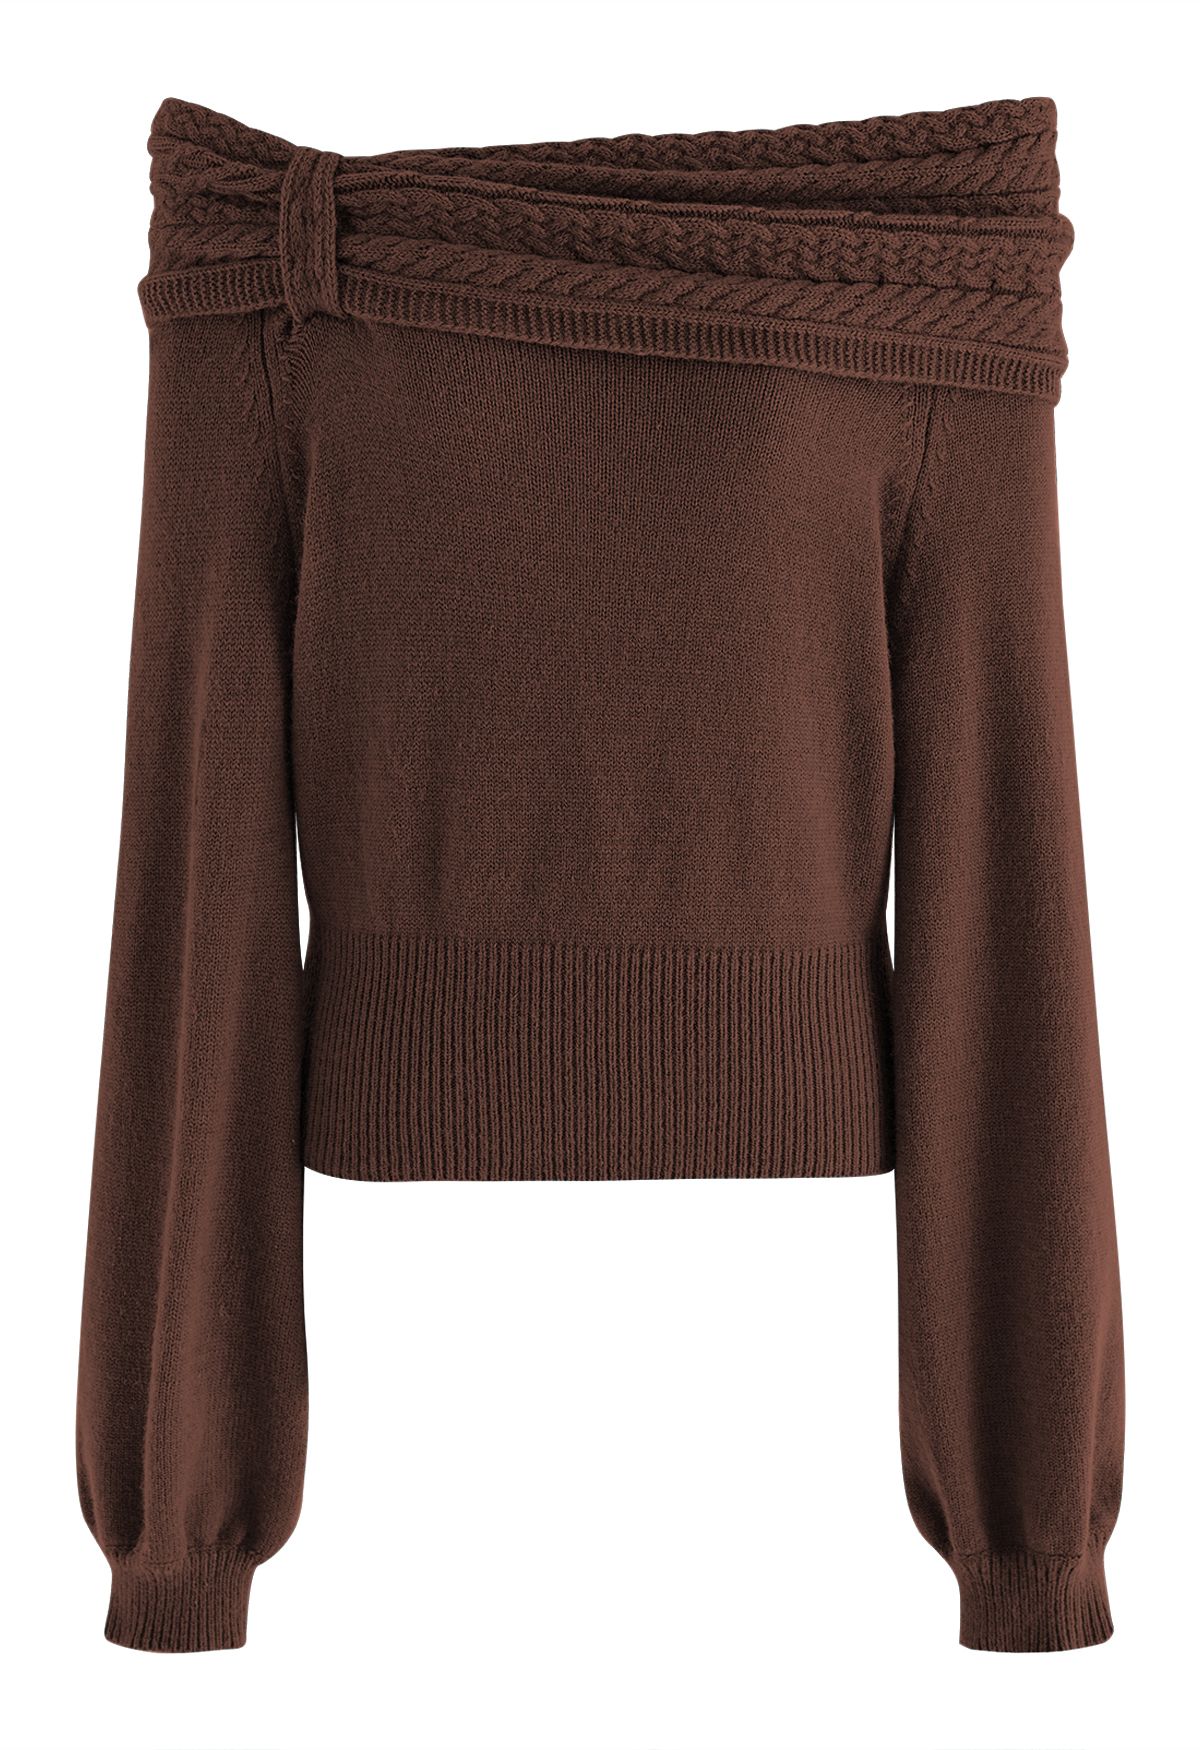 Braided Flap Off-Shoulder Knit Top in Brown